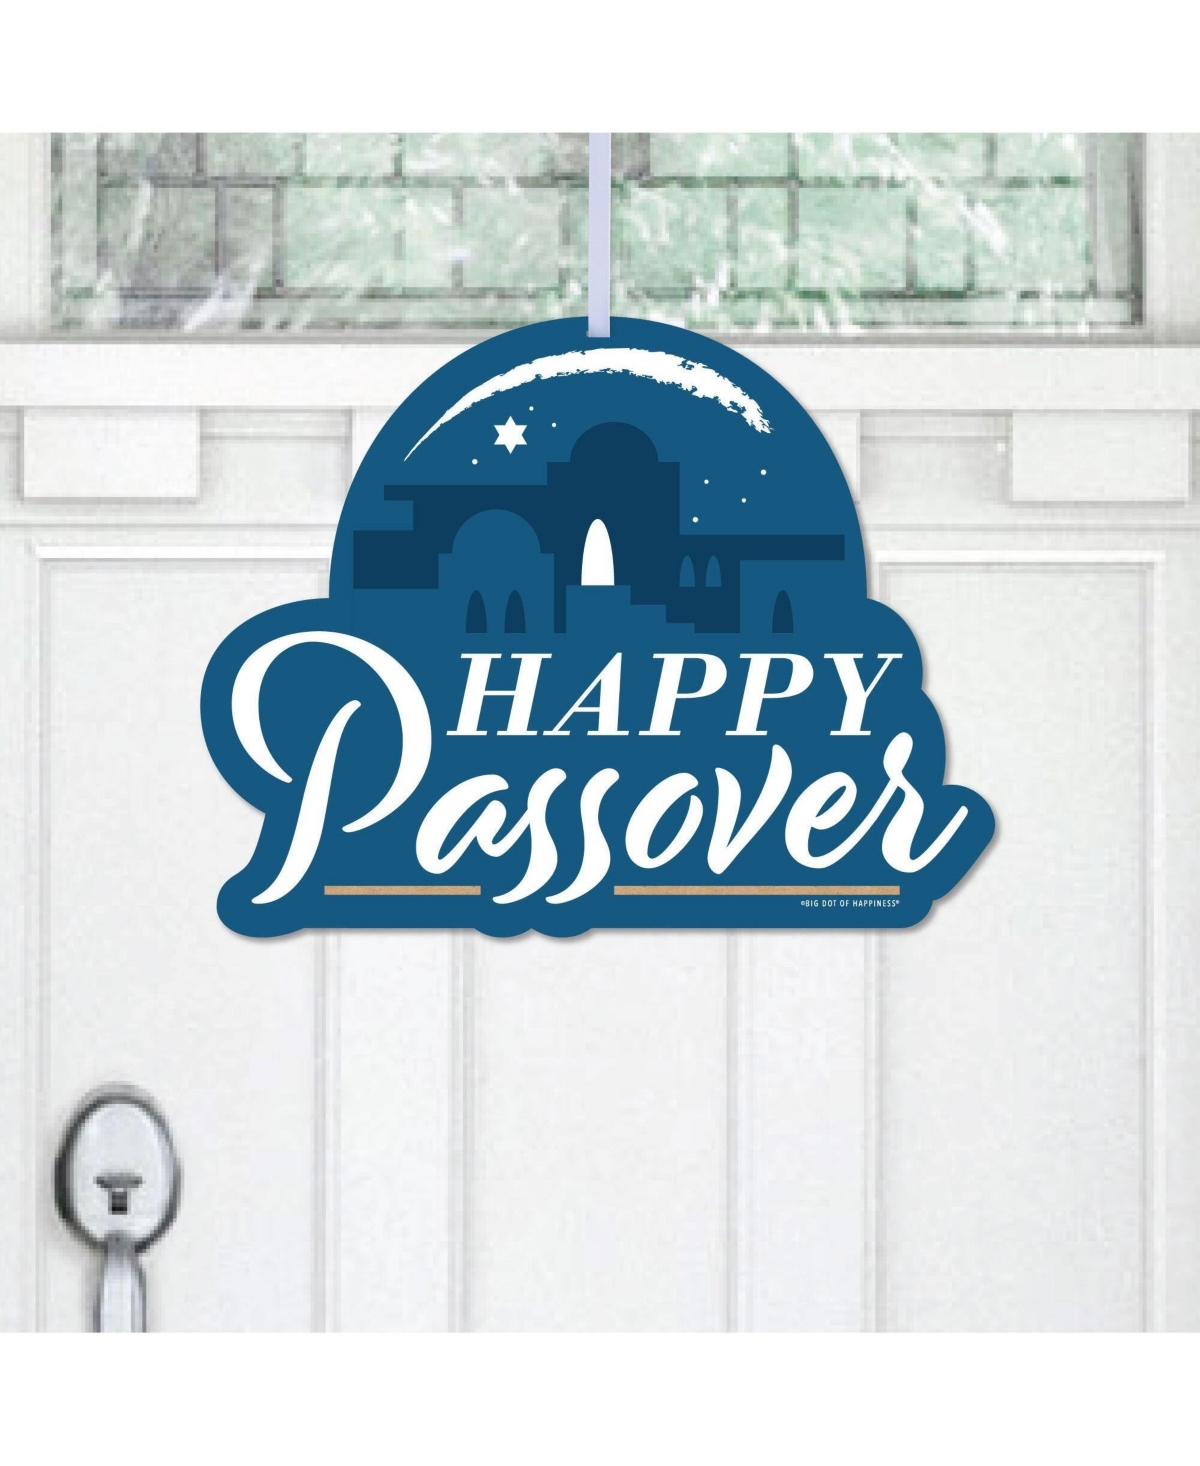 Happy Passover Pesach Jewish Holiday Party Outdoor Decor - Front Door Decor 1 Pc